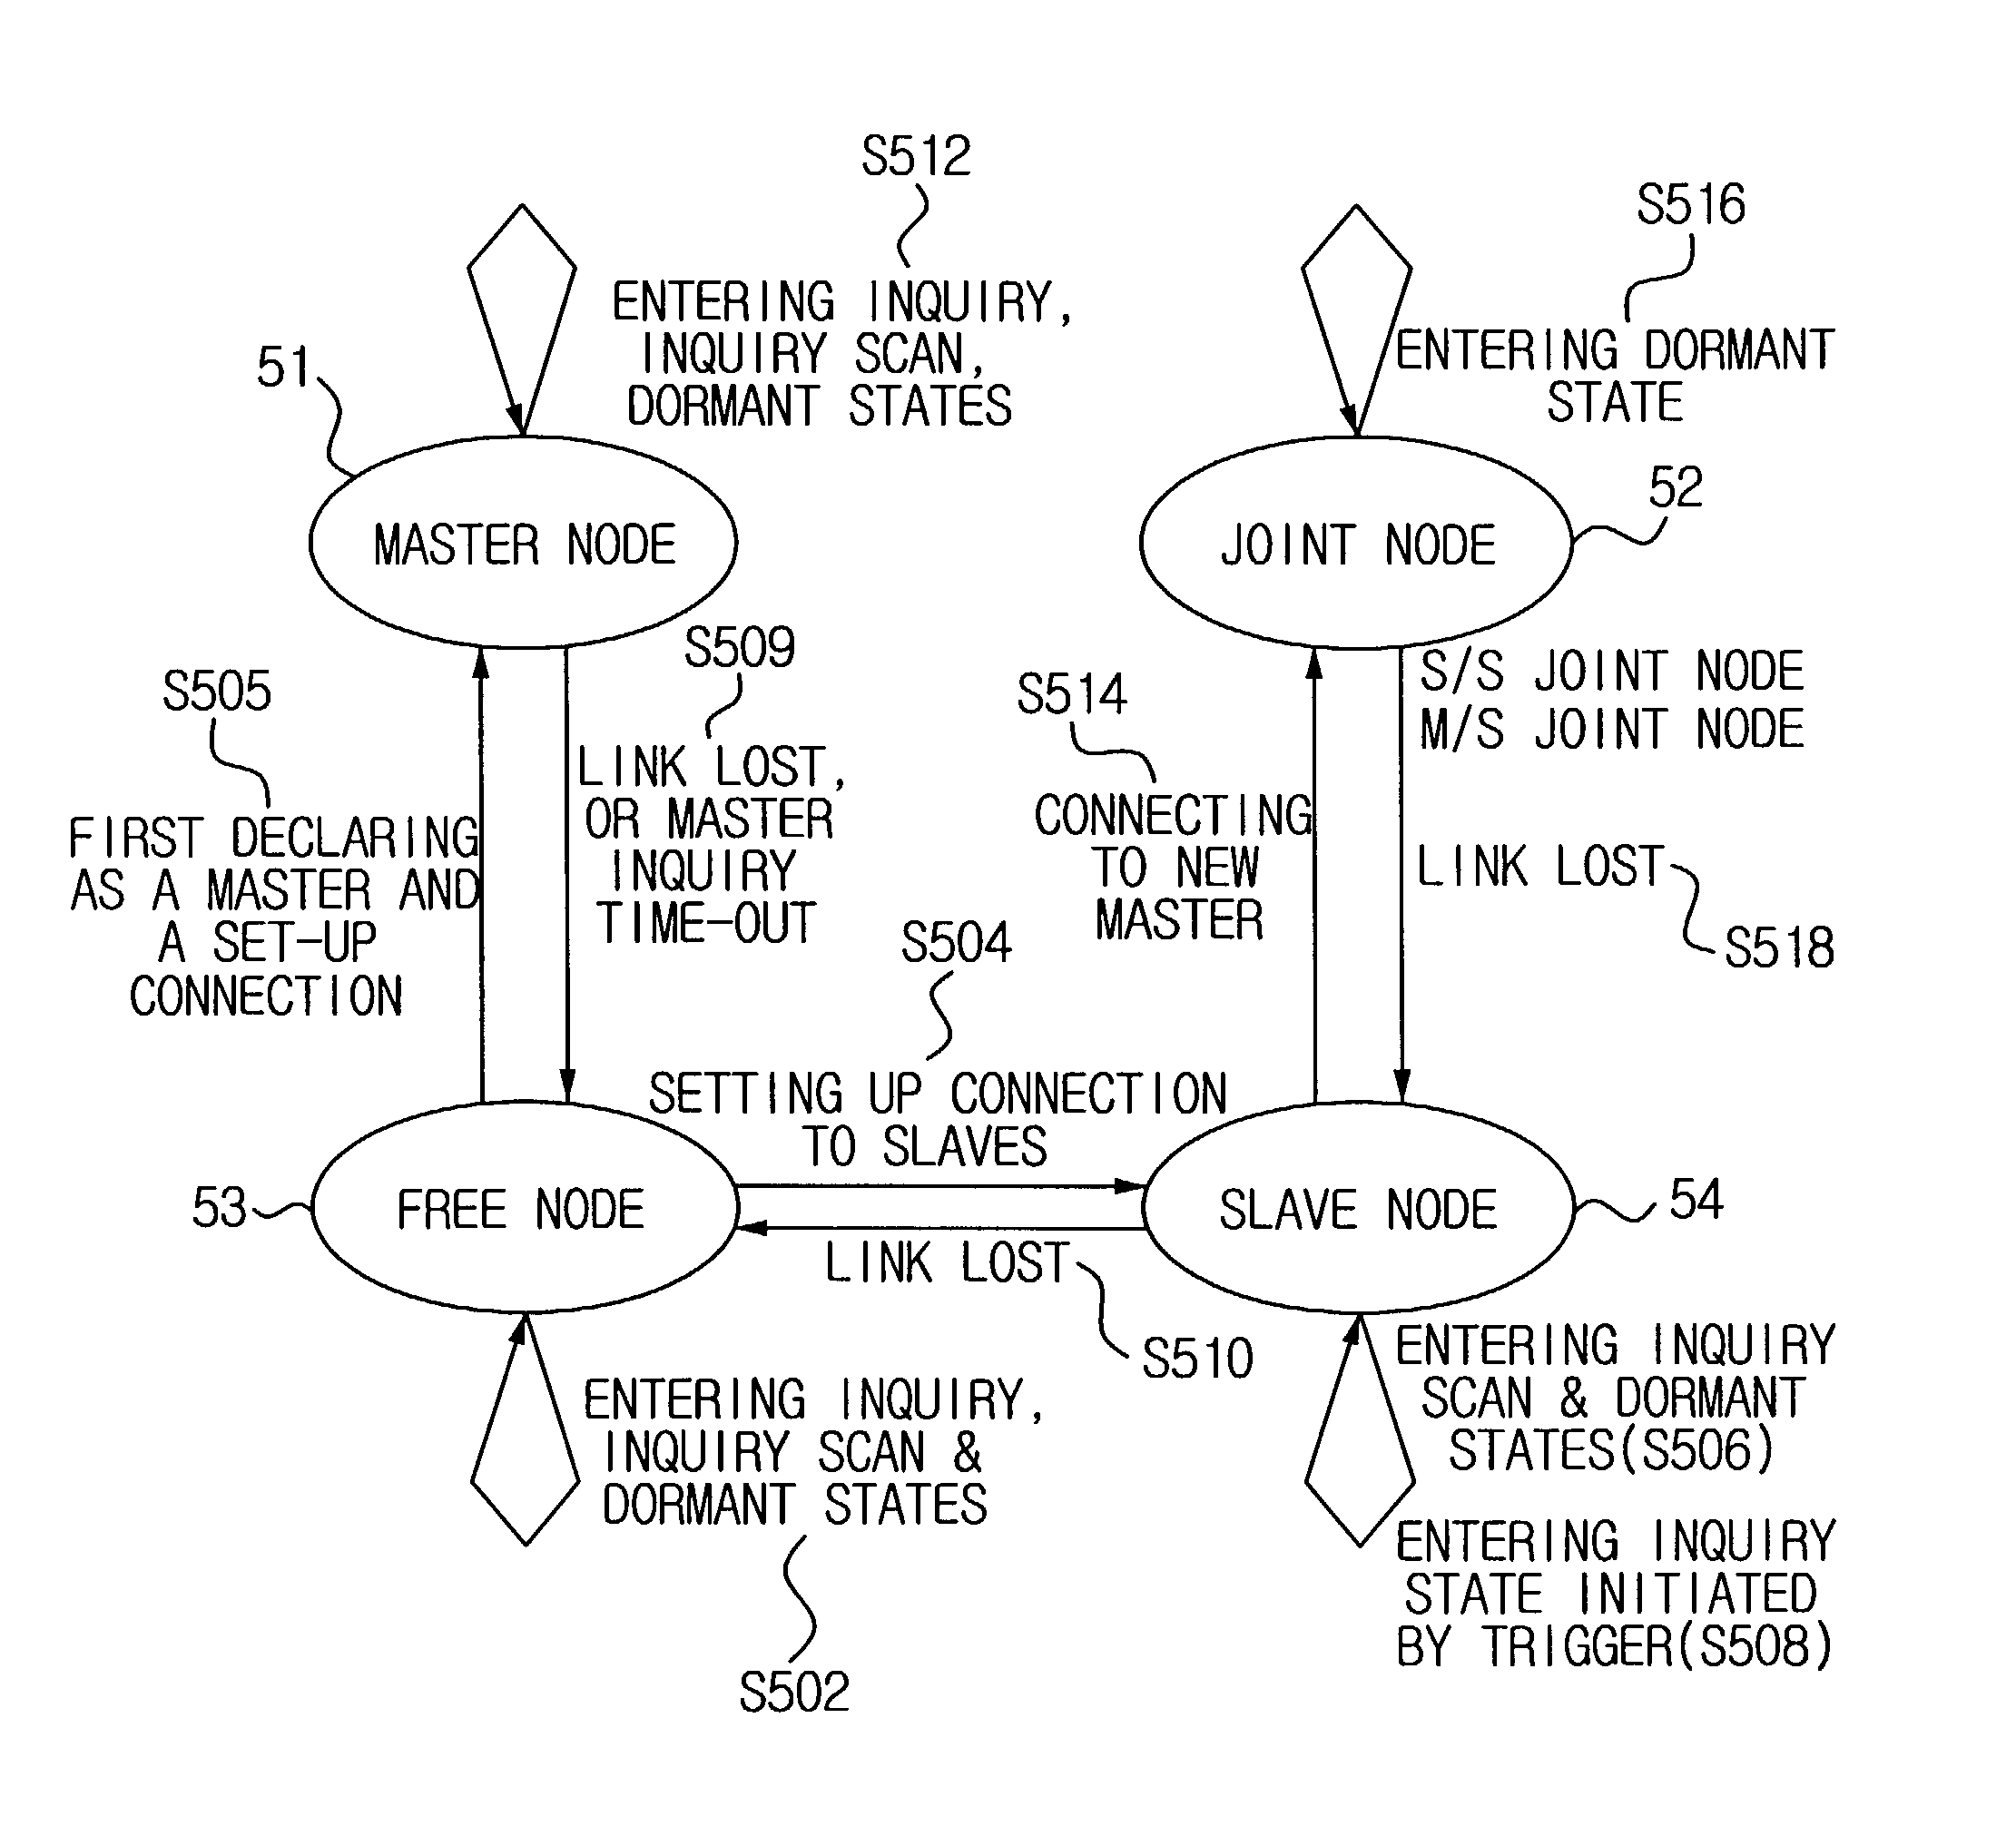 Method for bluetooth on-demand routing and network formation, and communication method in bluetooth group ad hoc network